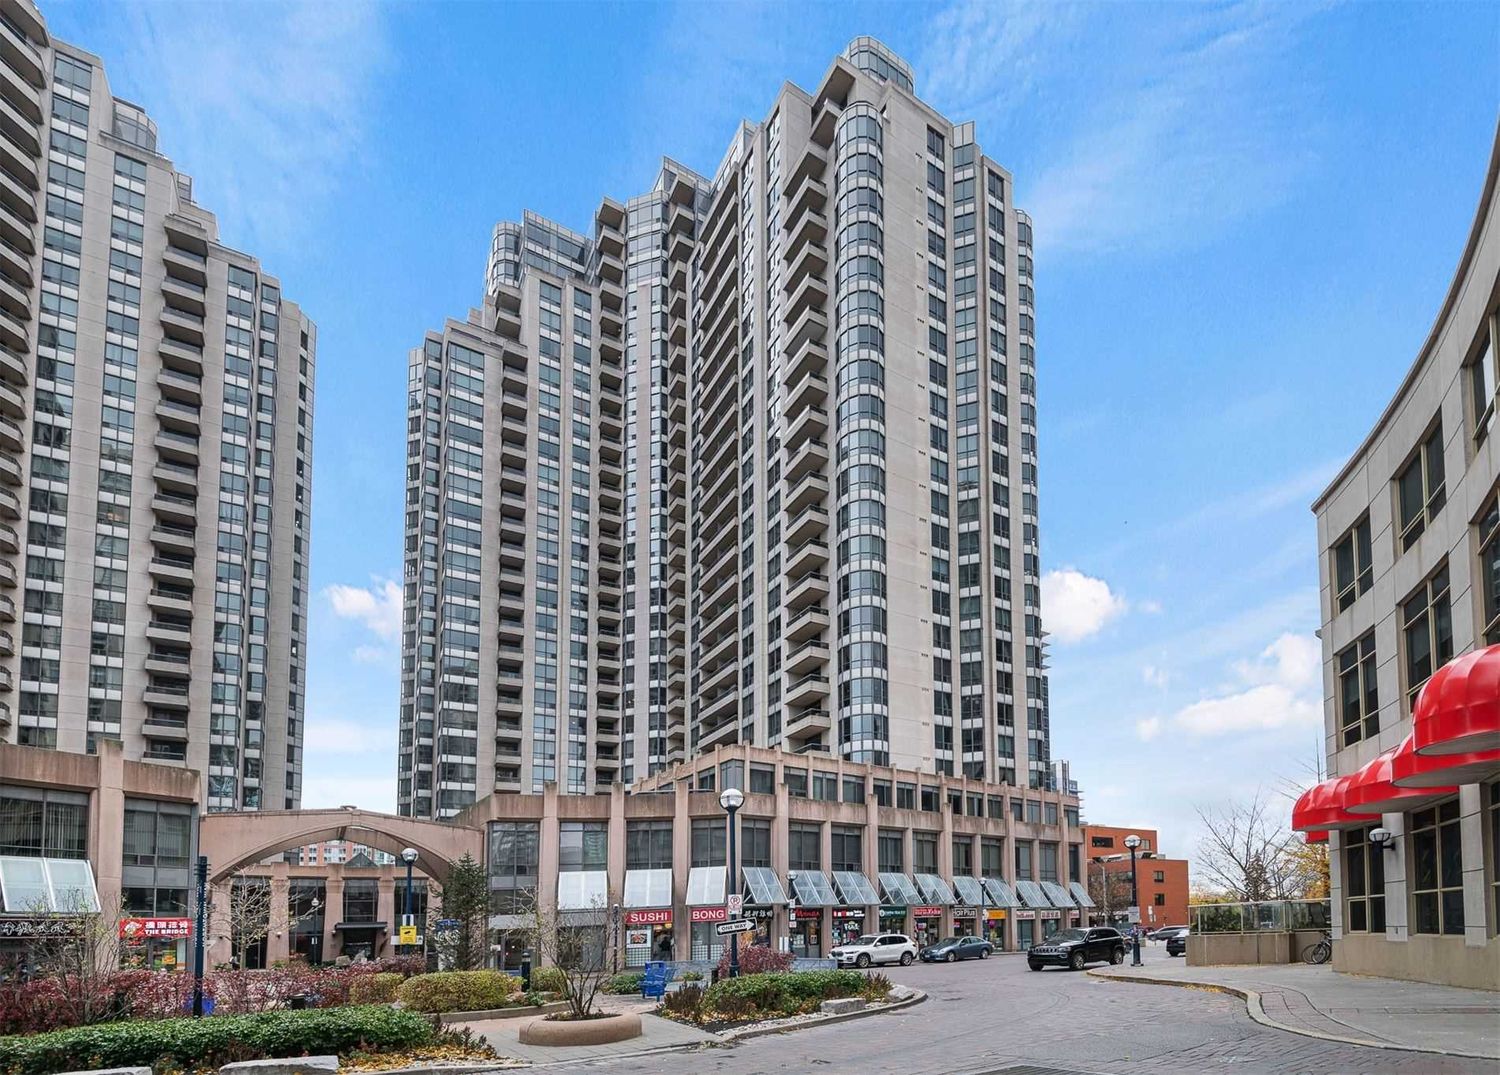 5 Northtown Way. Triomphe Condos is located in  North York, Toronto - image #1 of 3